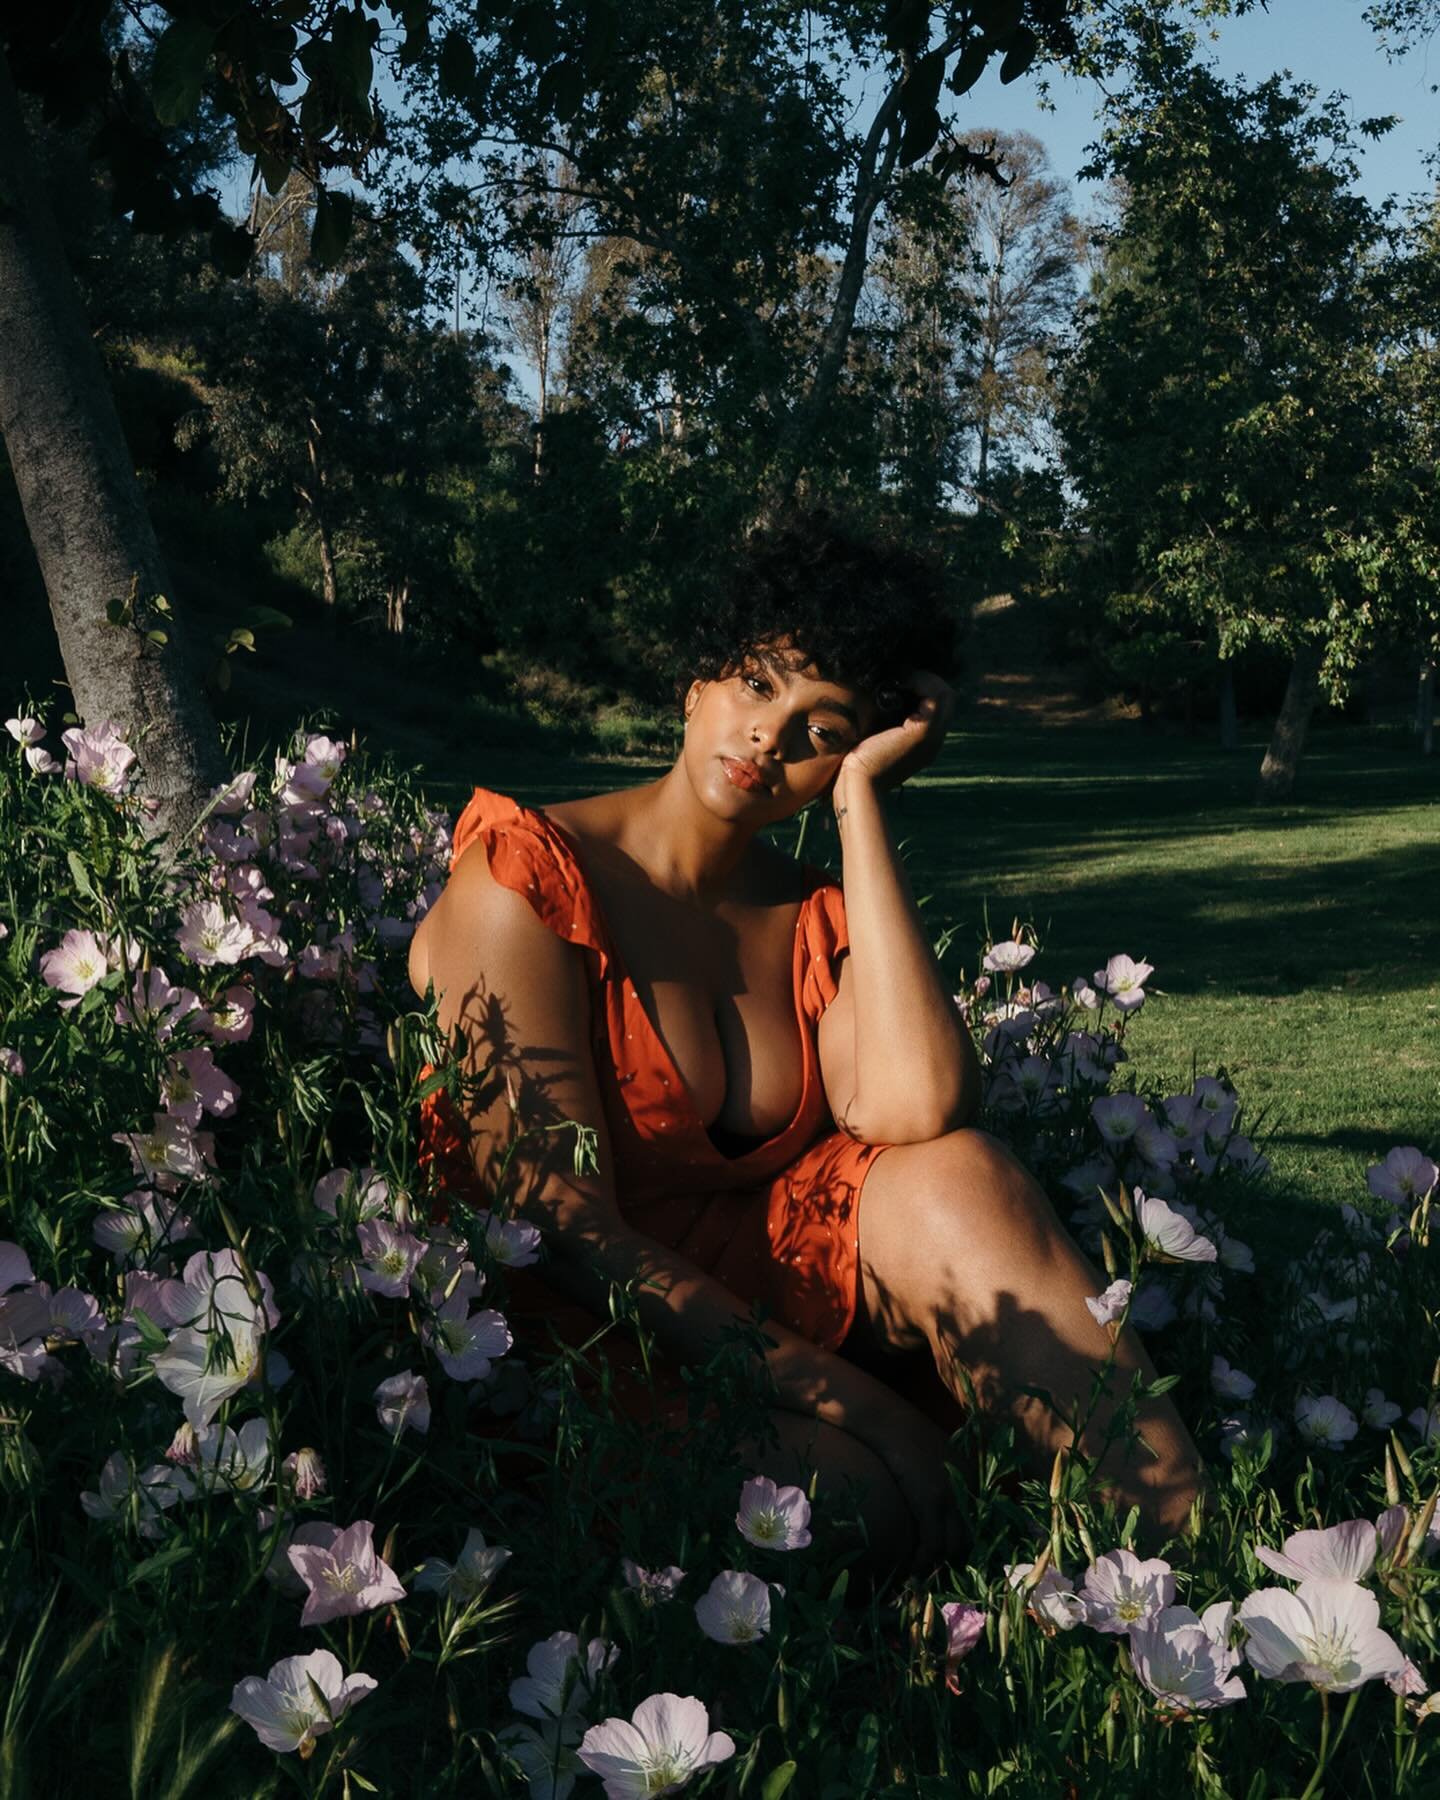 Chasing pockets of sunshine in the park with beautiful Courtney @thasupremecourt